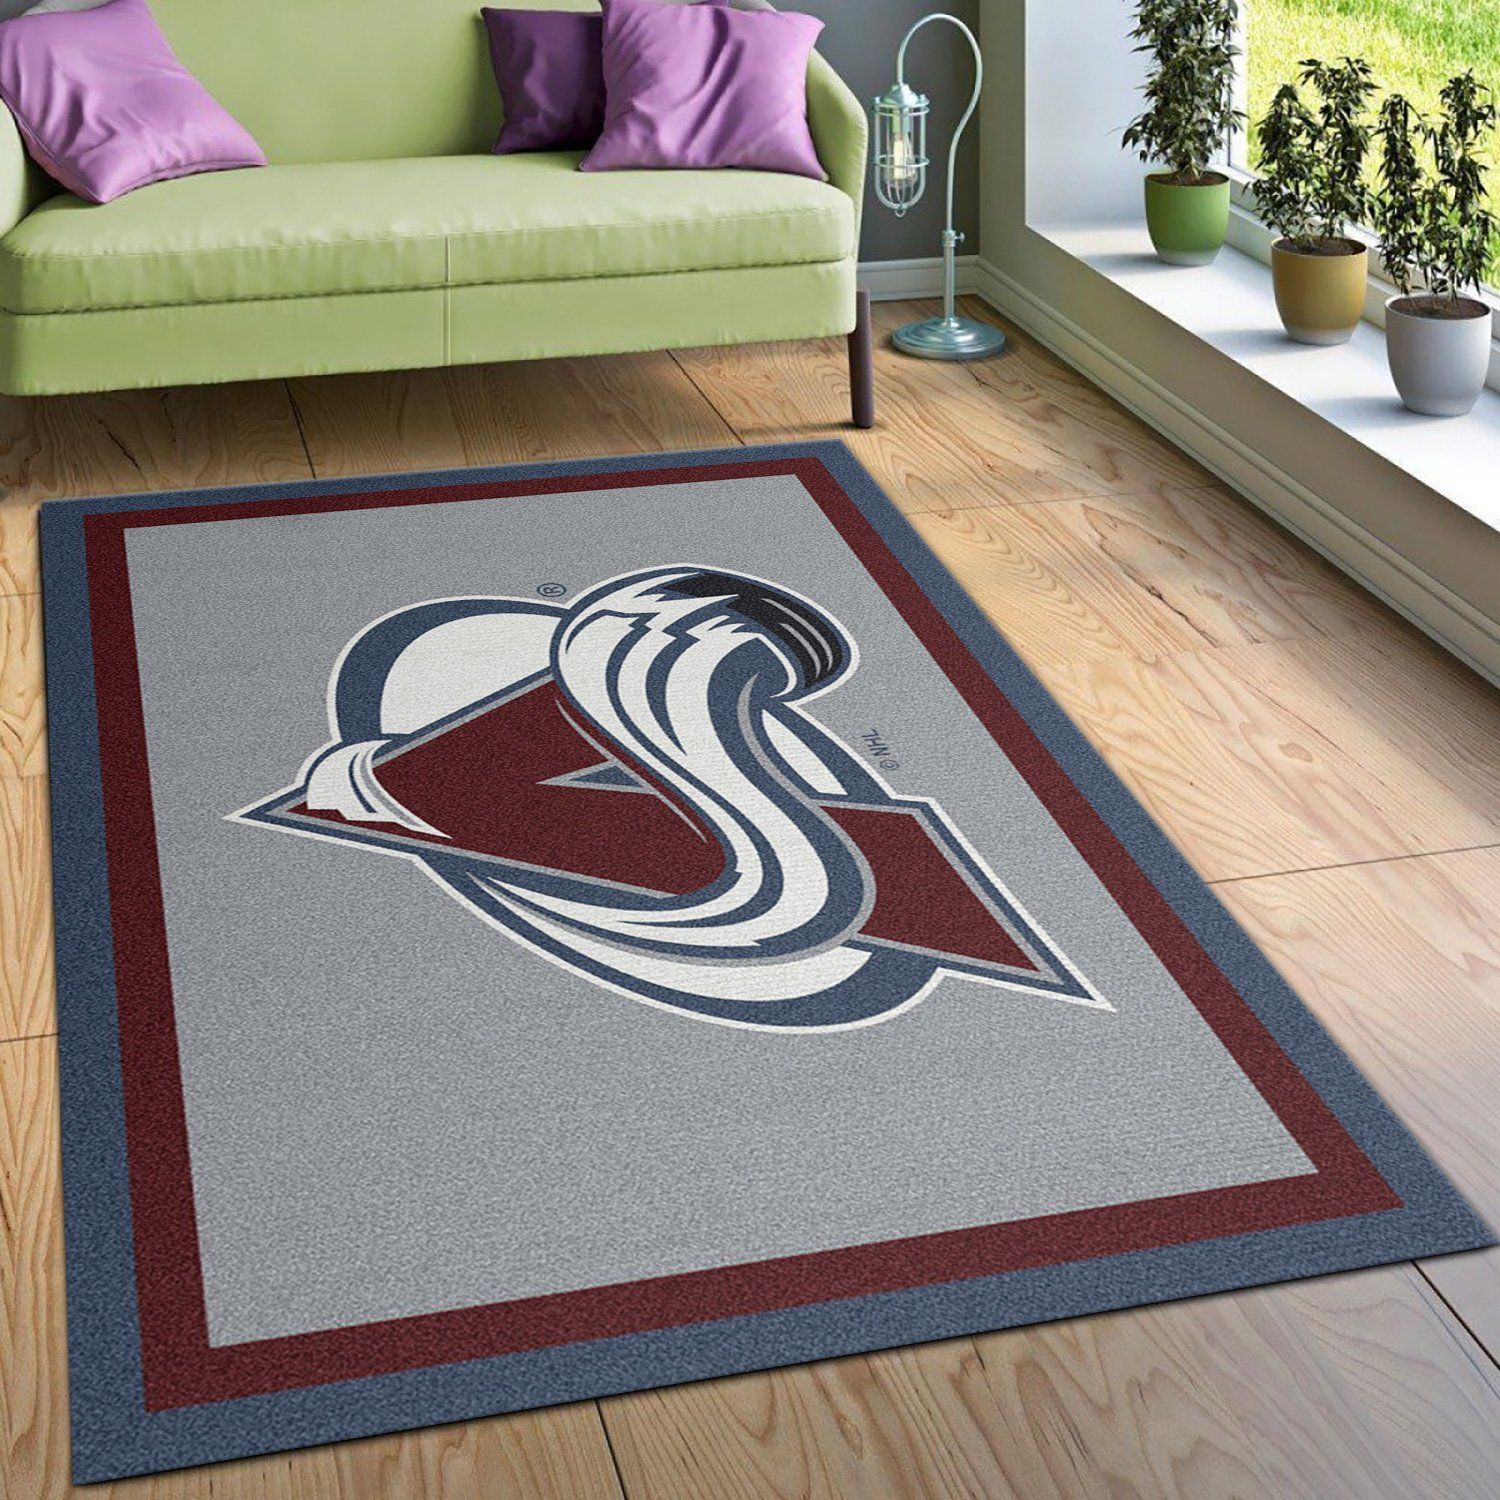 Nhl Spirit Colorado Avalanche Area Rug Carpet, Kitchen Rug, Christmas Gift US Decor - Indoor Outdoor Rugs 2